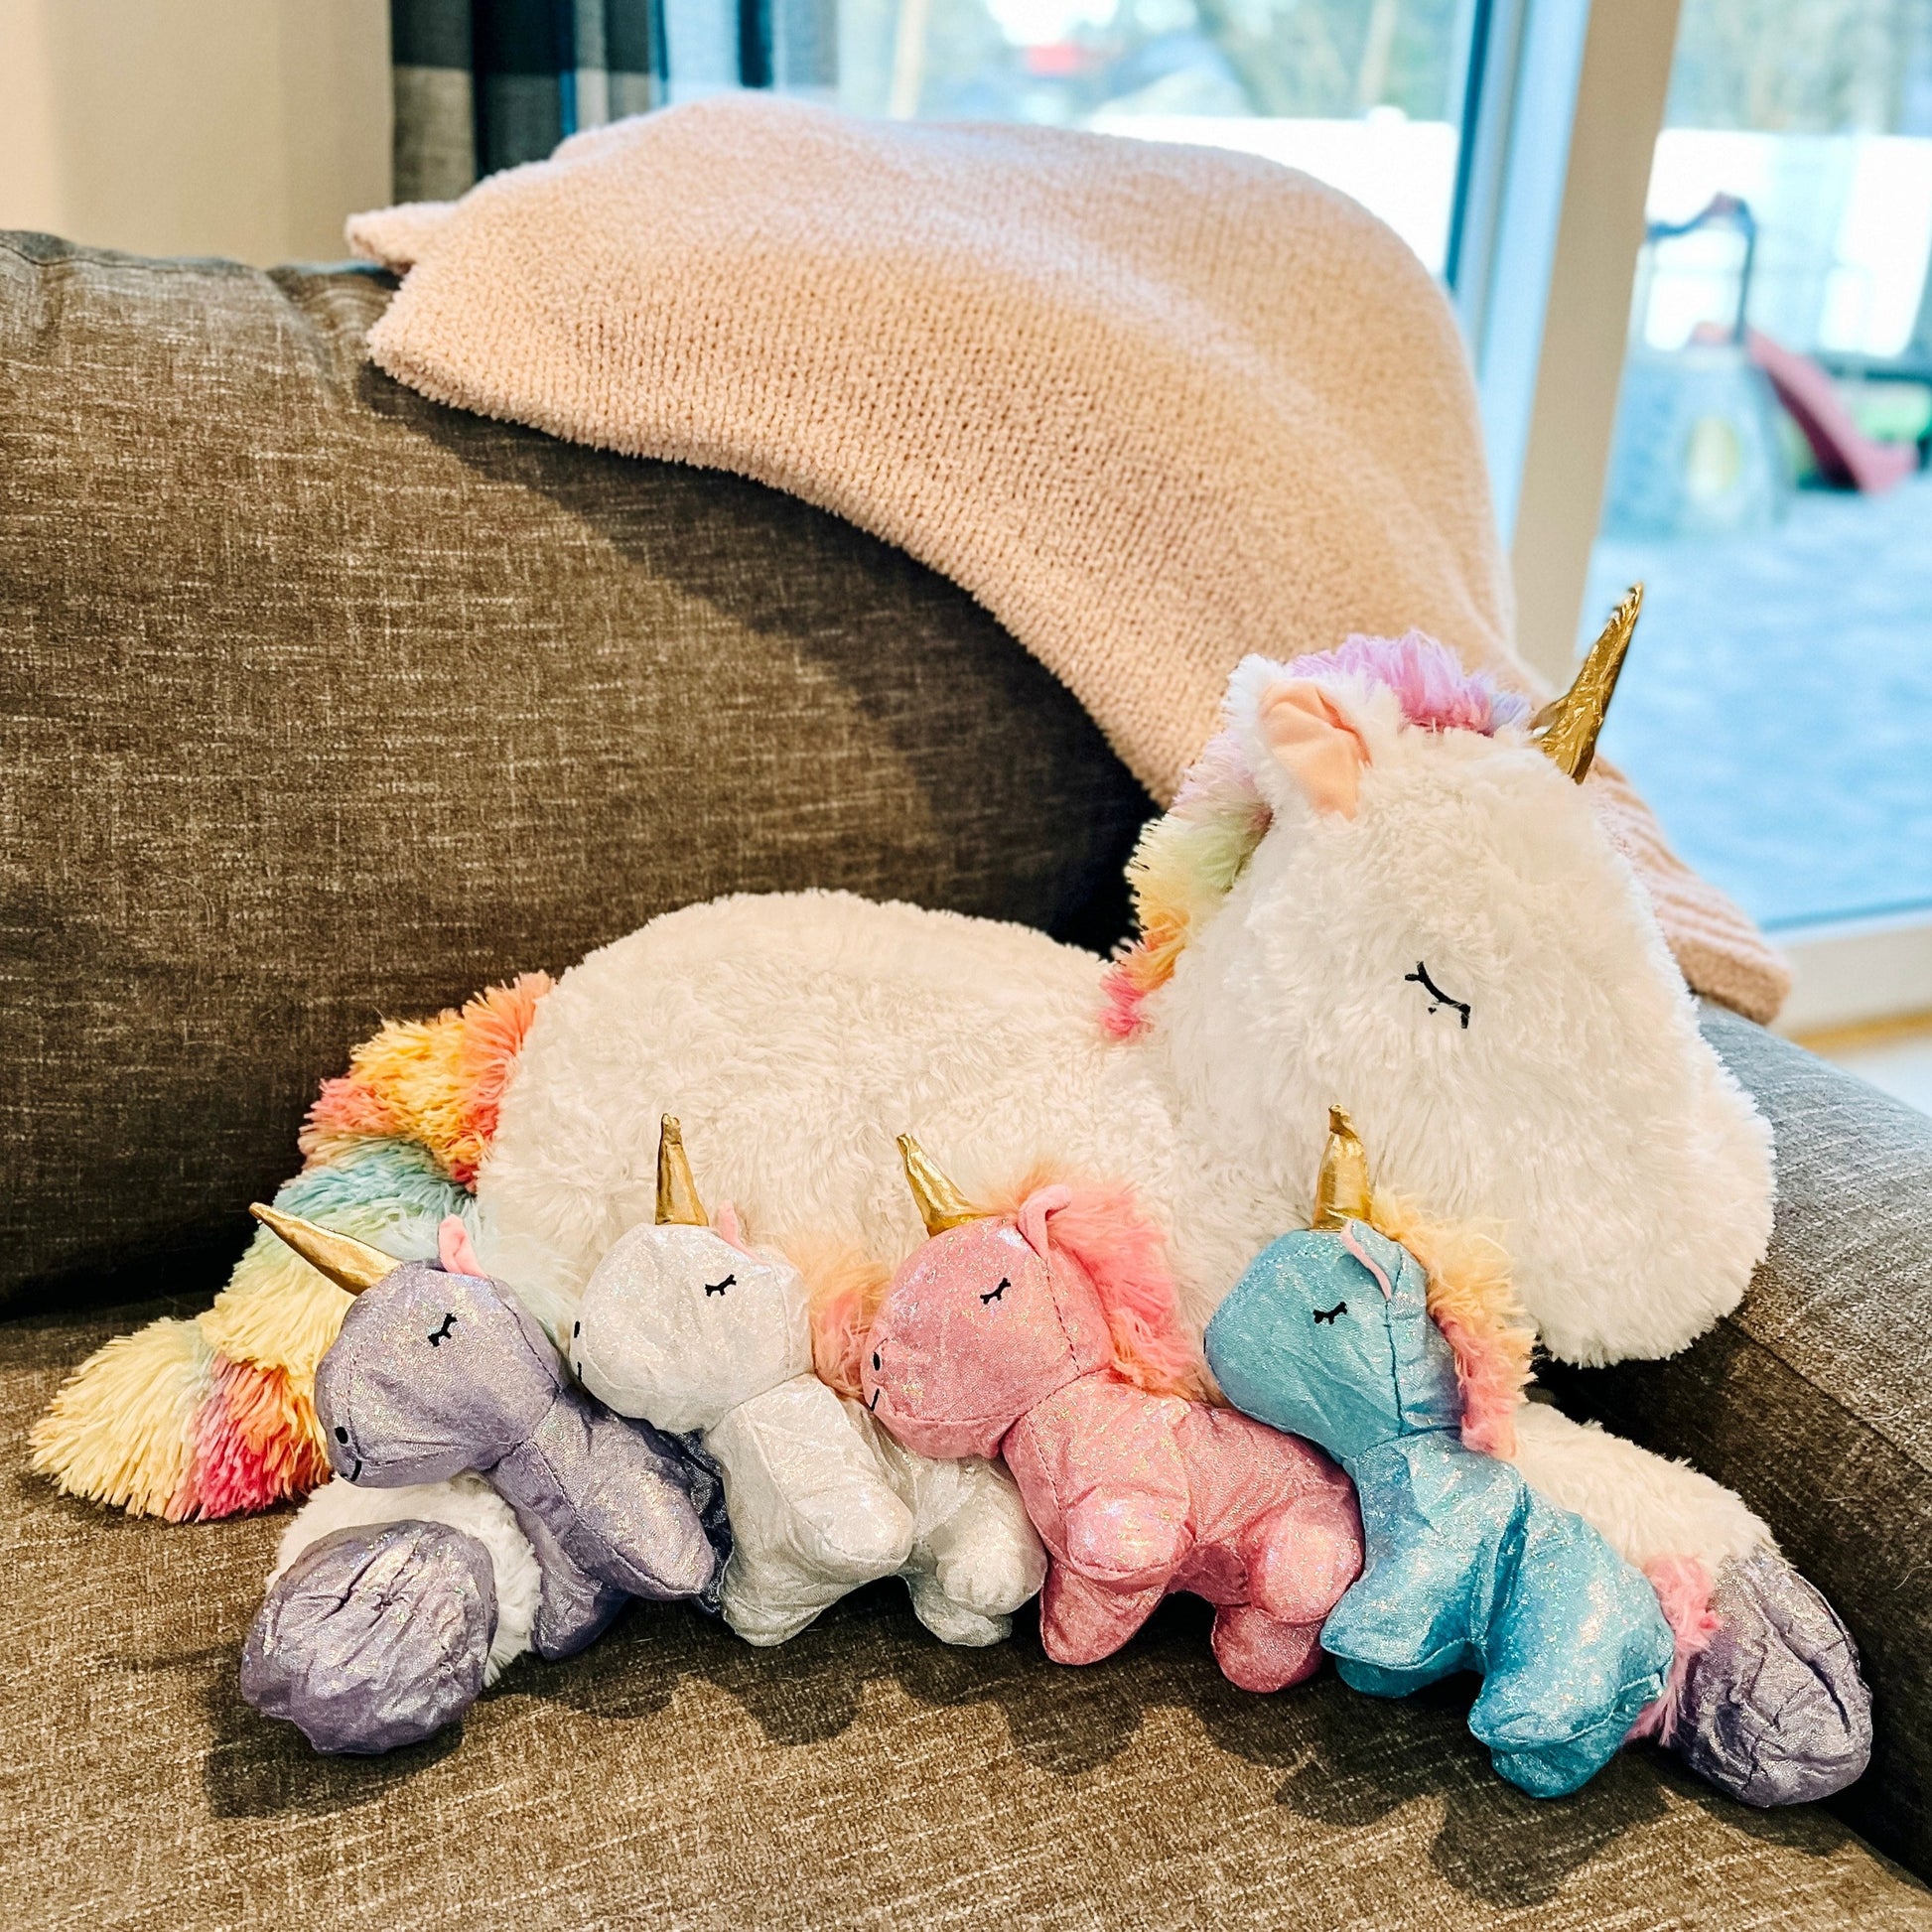 Tezituor Unicorn Mom with Baby Plushies, White/Green/Pink/Beige, 24 Inches